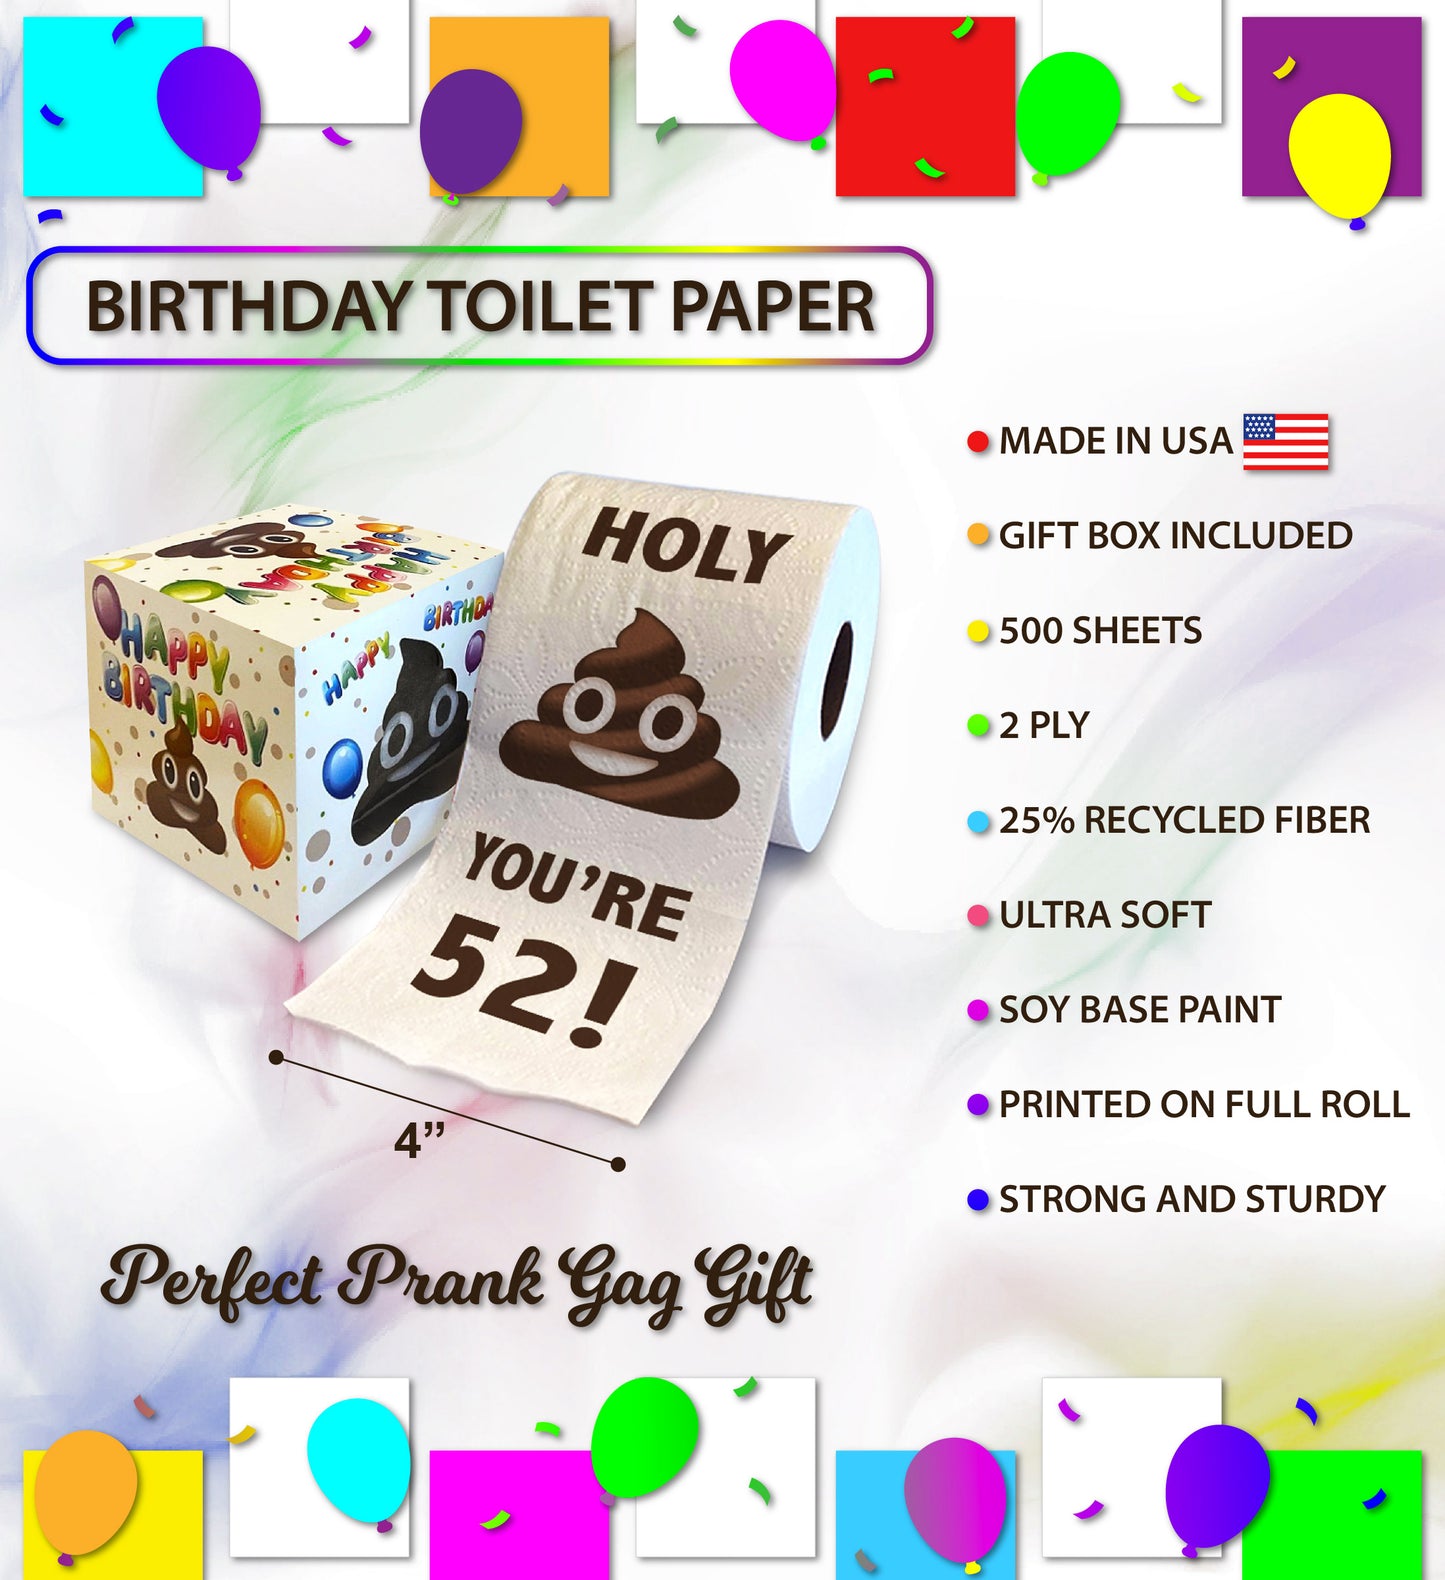 Printed TP Holy Poop You're 52 Funny Toilet Paper Roll Birthday Party Gag Gift